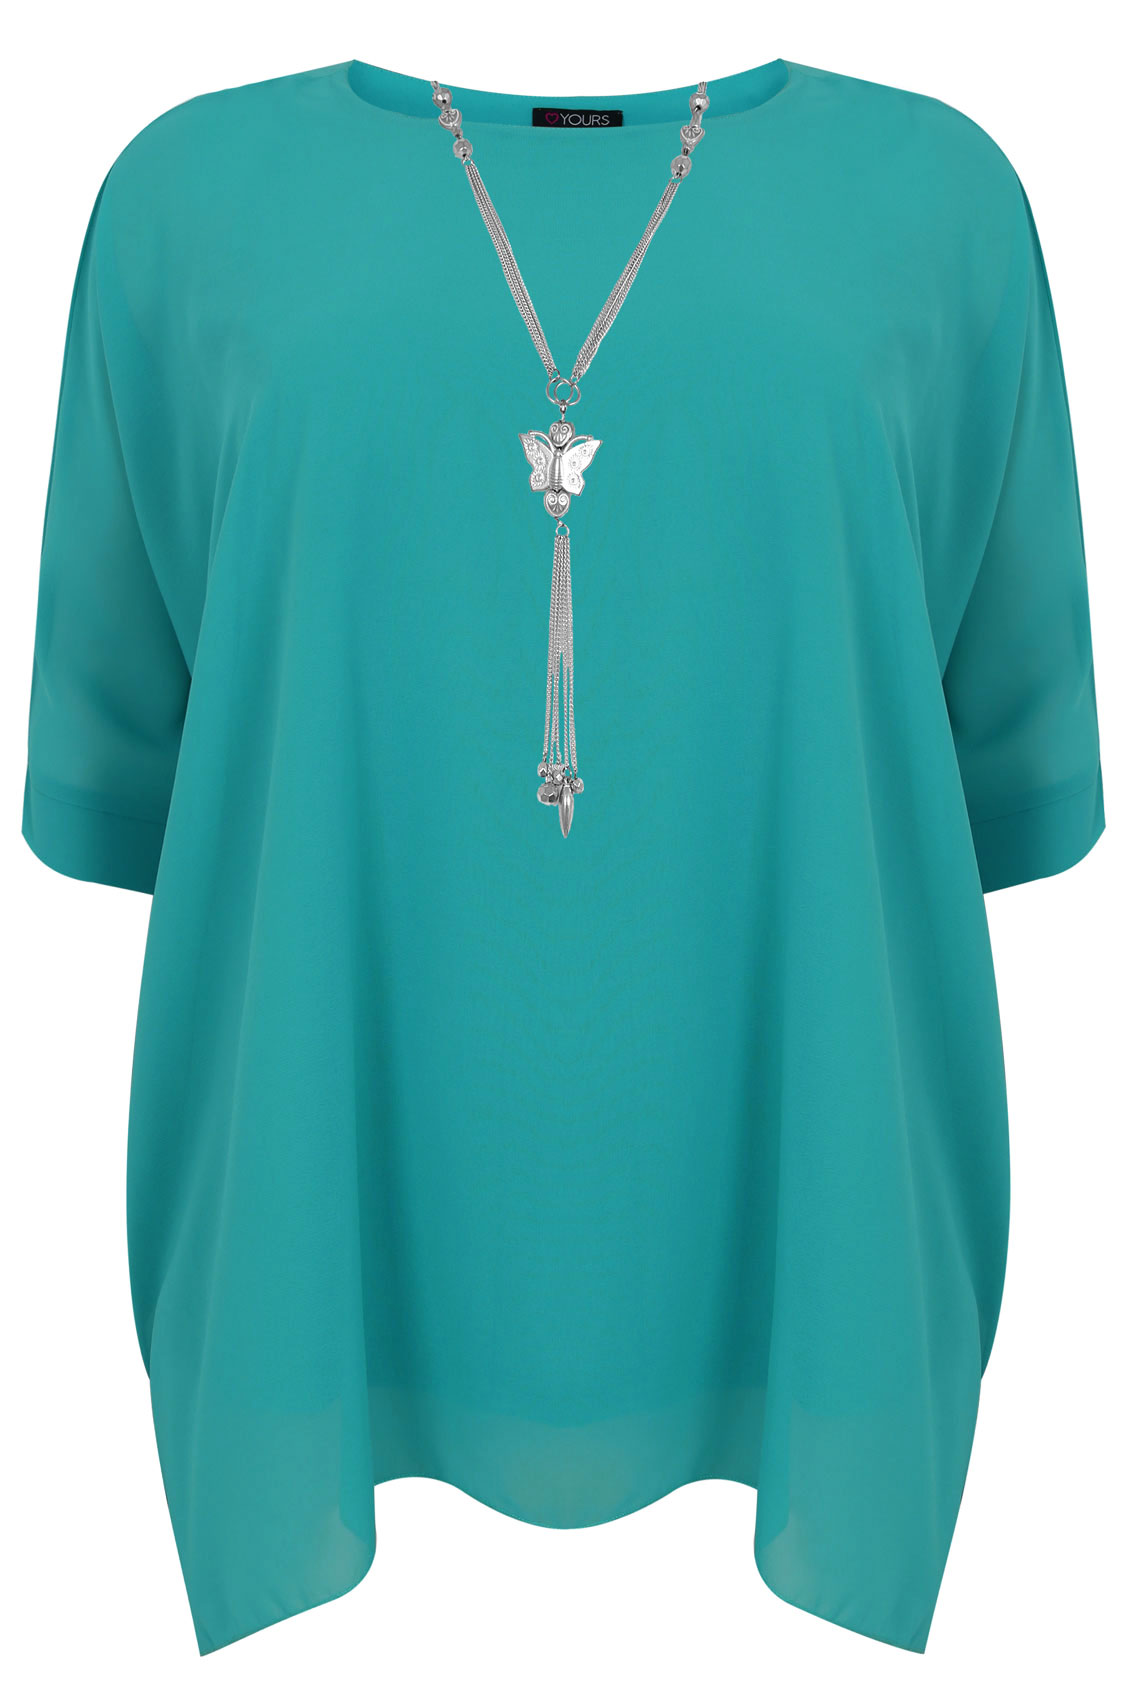 Turquoise Batwing Sleeve Chiffon Top With Necklace Plus Size 14 to 32